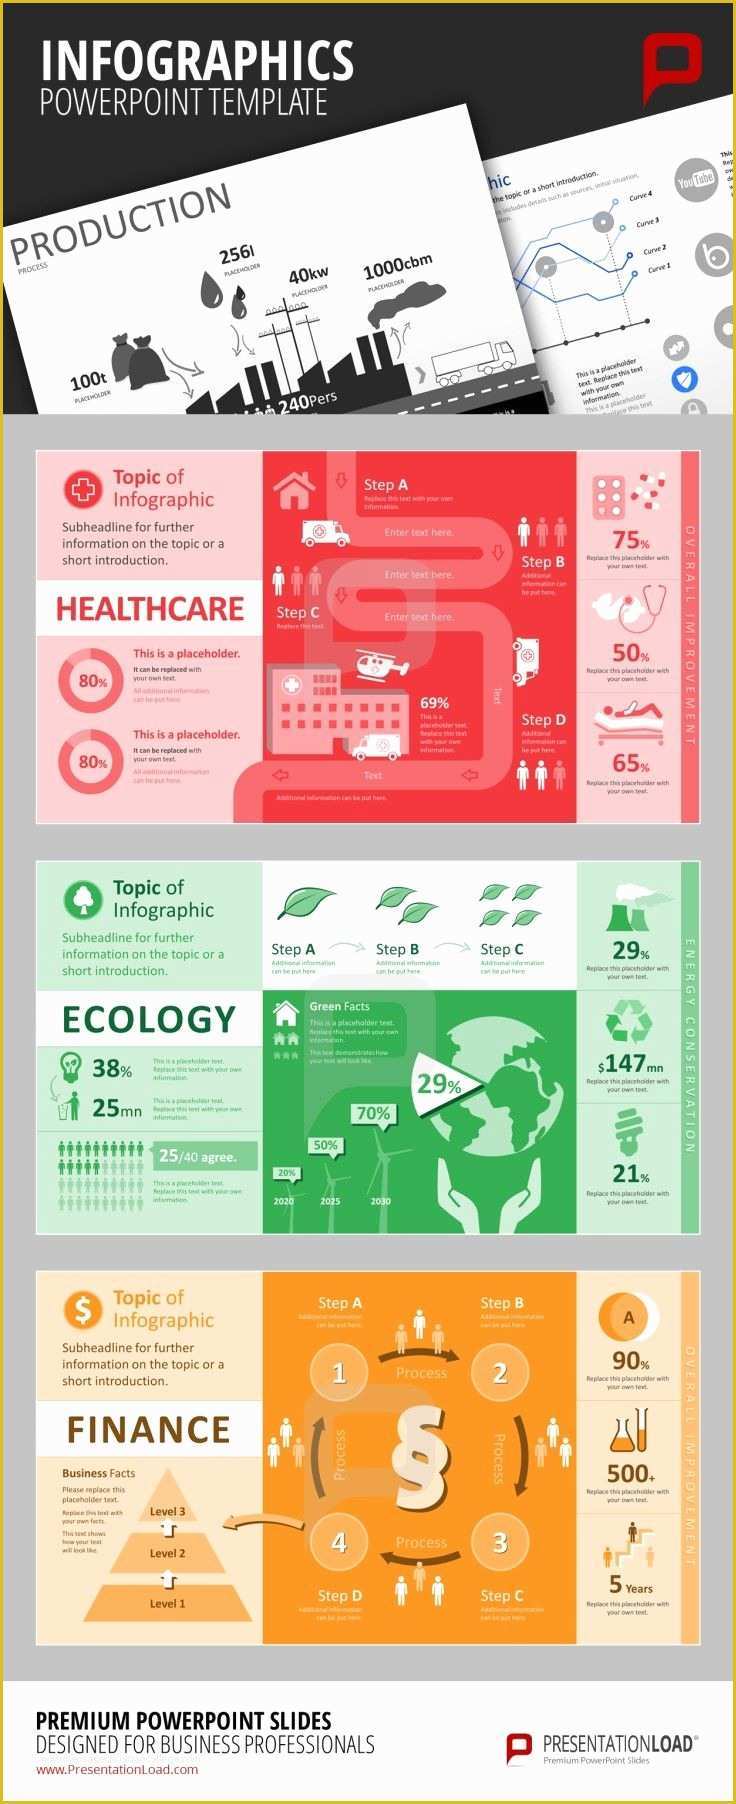 Infographic Template Powerpoint Free Of 10 Images About Infographics Powerpoint Templates On